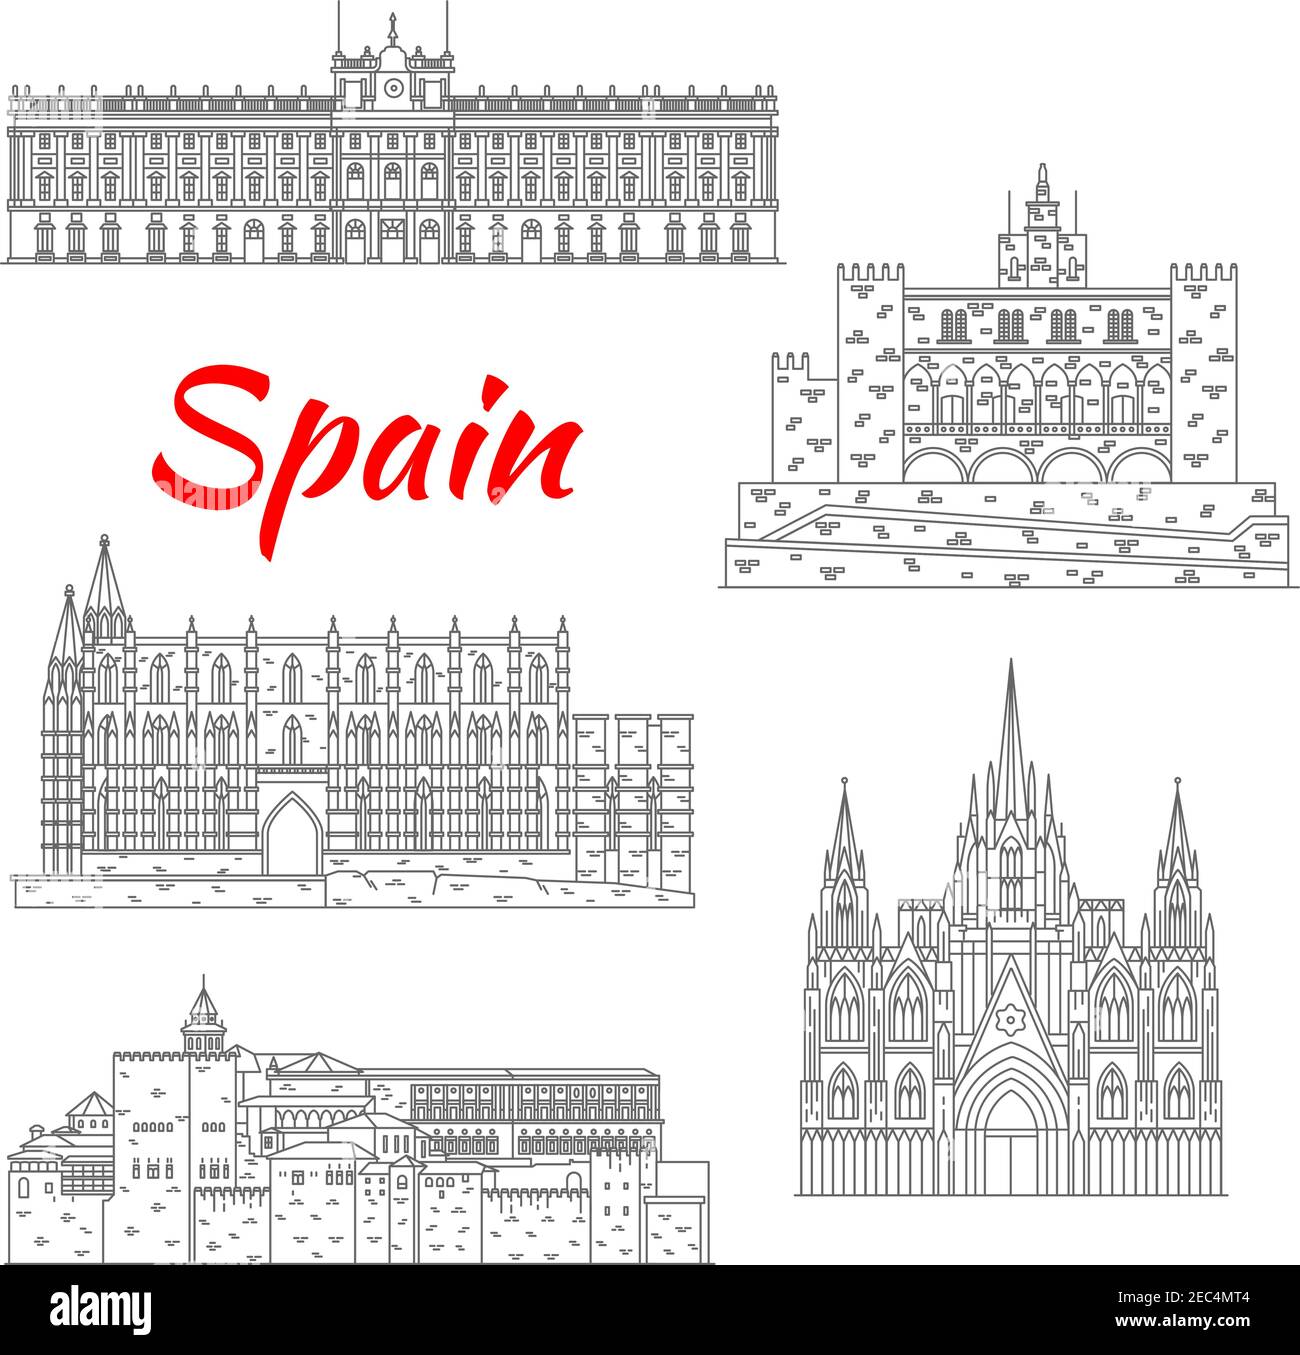 Spanish tourist sights icon of fortress Alhambra in Granada, Royal Palace of Madrid, Cathedral of Santa Maria in Palma, Barcelona Cathedral and Royal Stock Vector